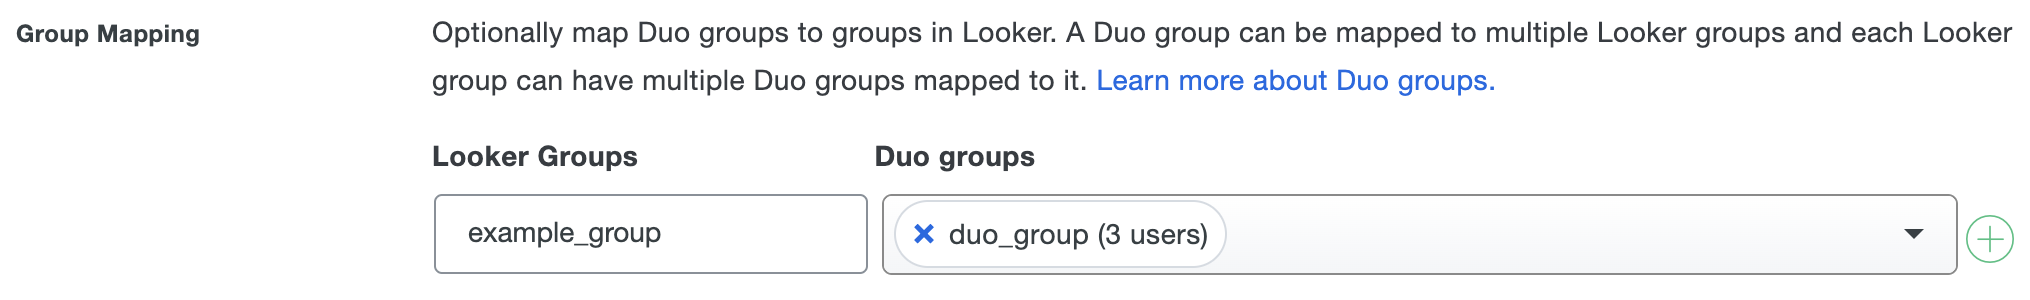 Duo Looker Group Mapping